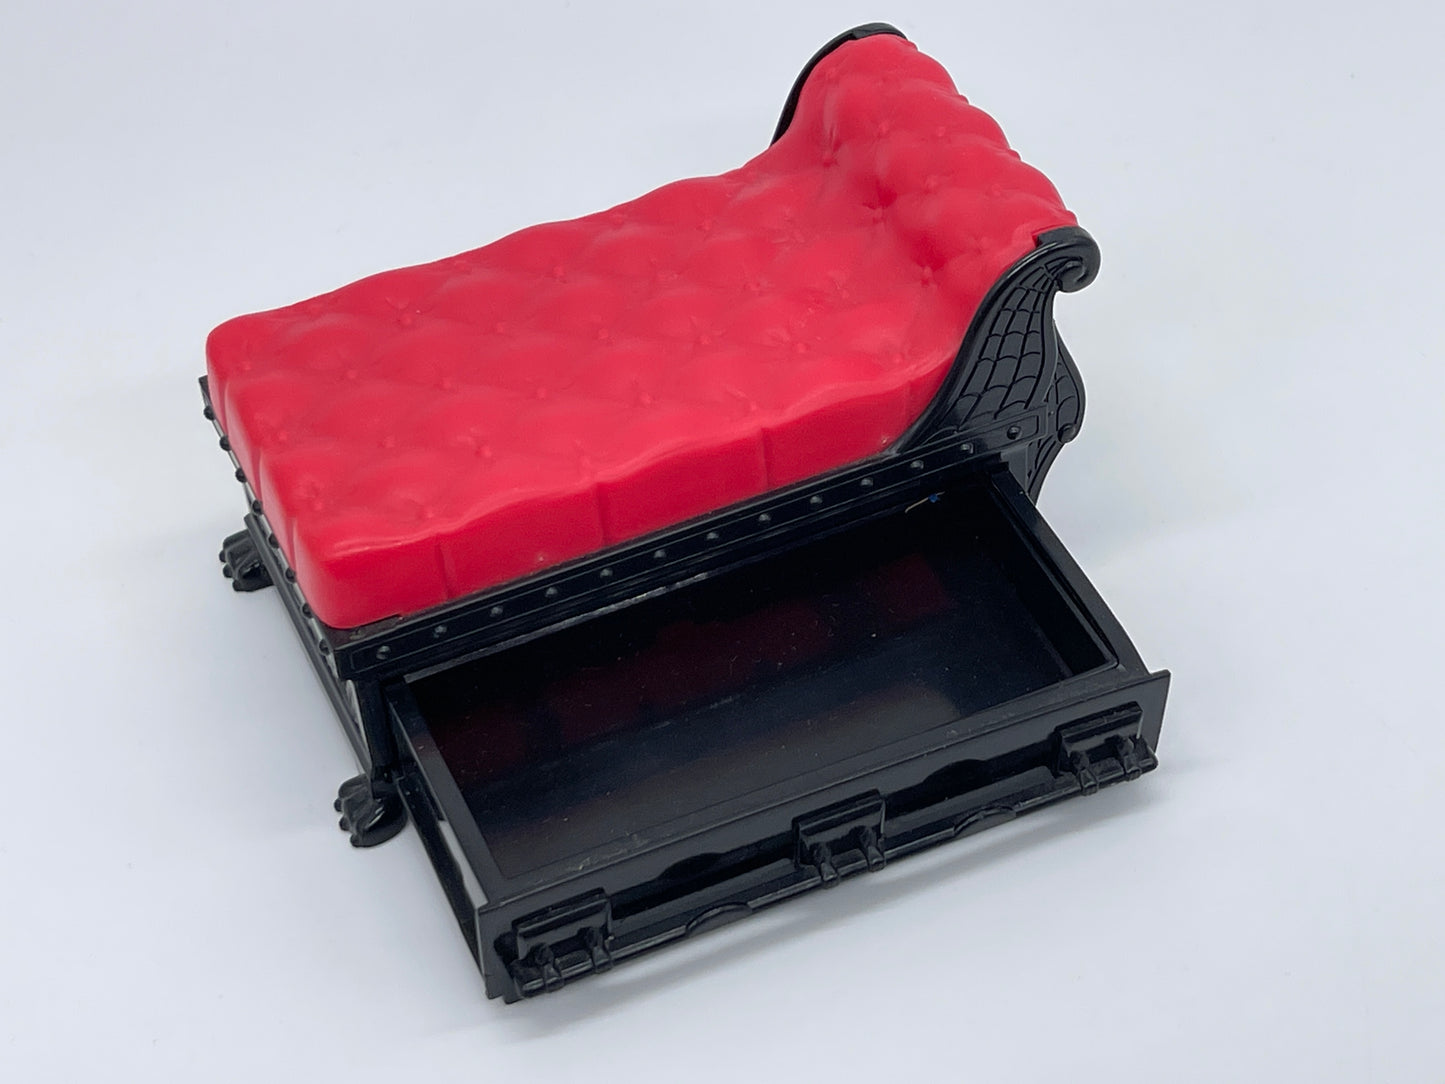 Monster High "Reclining Sofa / Bed with Secret Compartment" Secret Creepers Mattel (2013) 